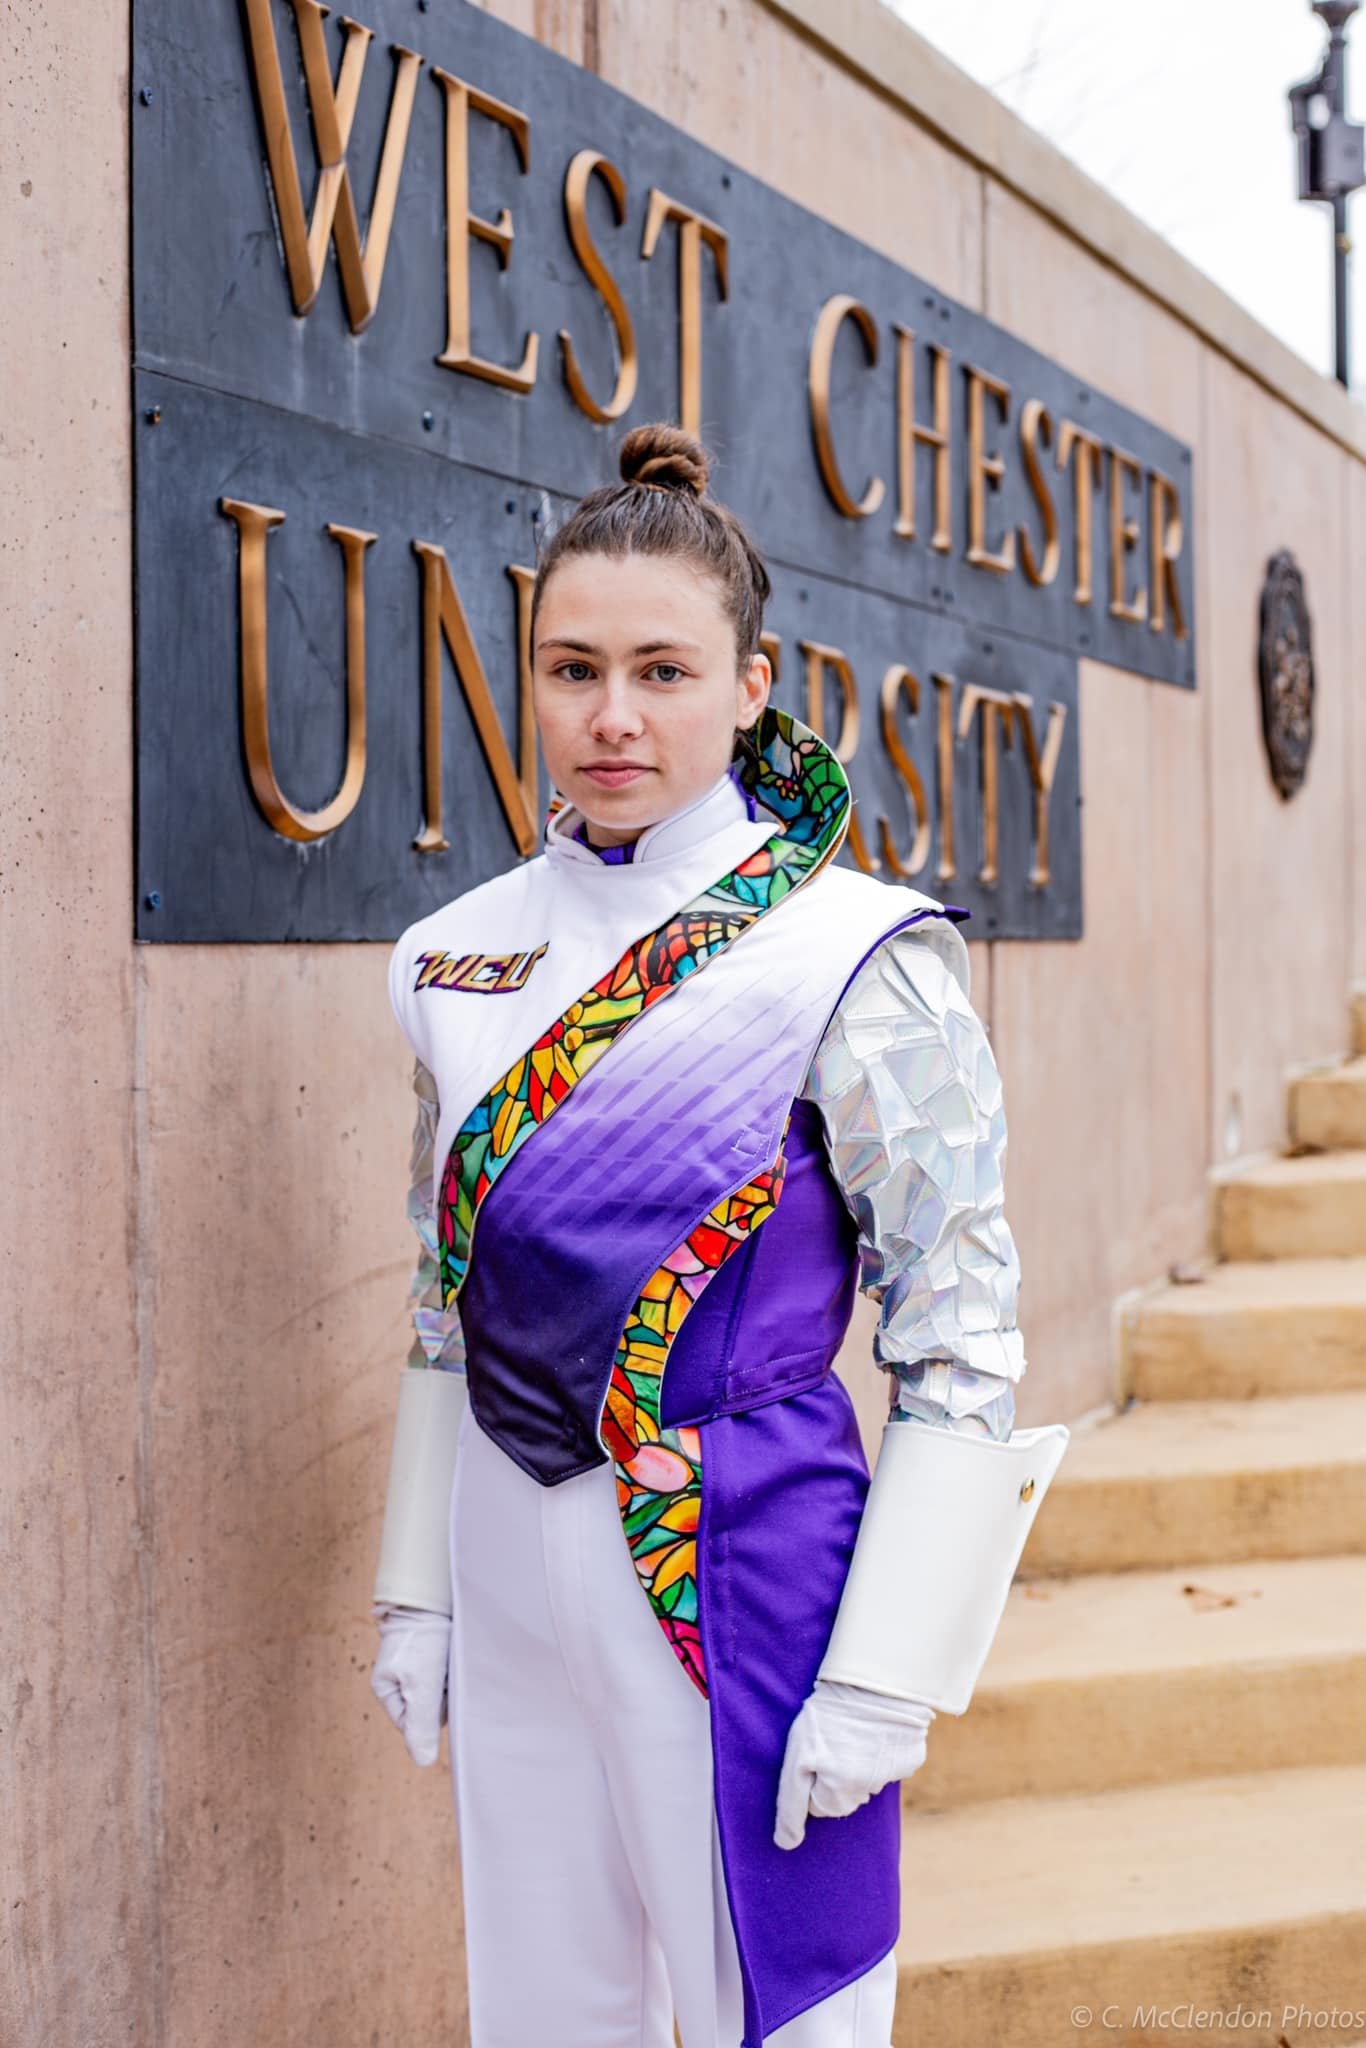 West Chester University woman custom band uniforms purple, black, and white